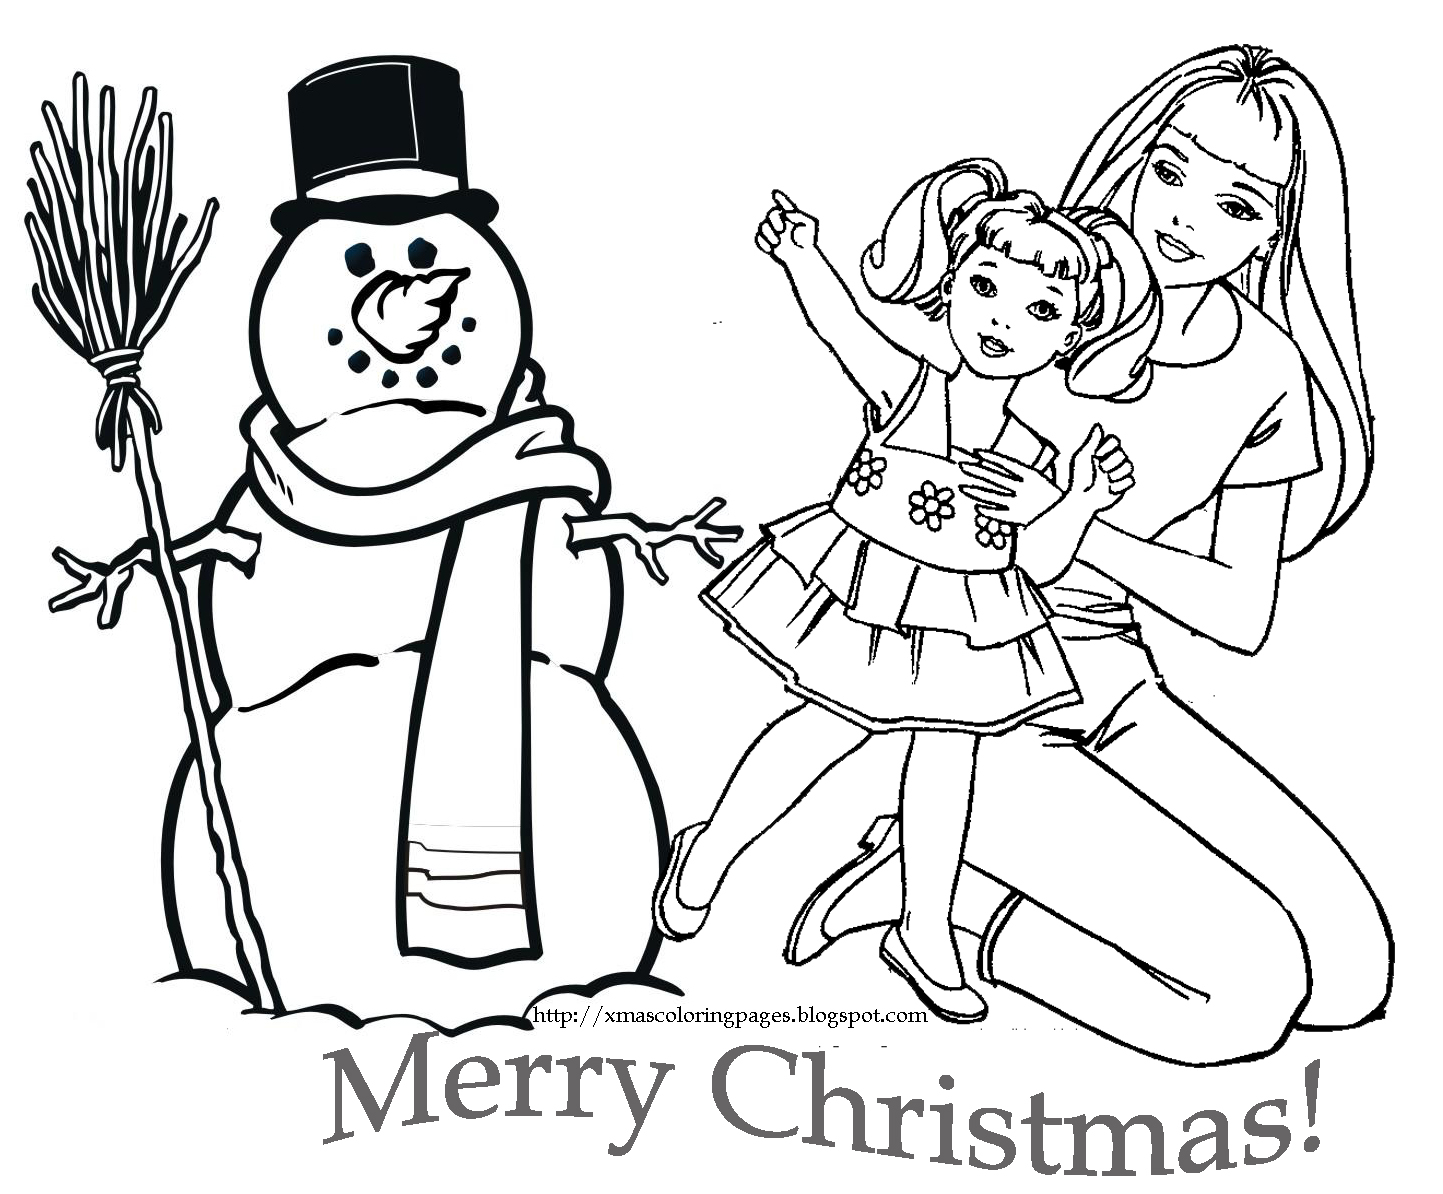 barbie-coloring-pages-barbie-christmas-coloring-page